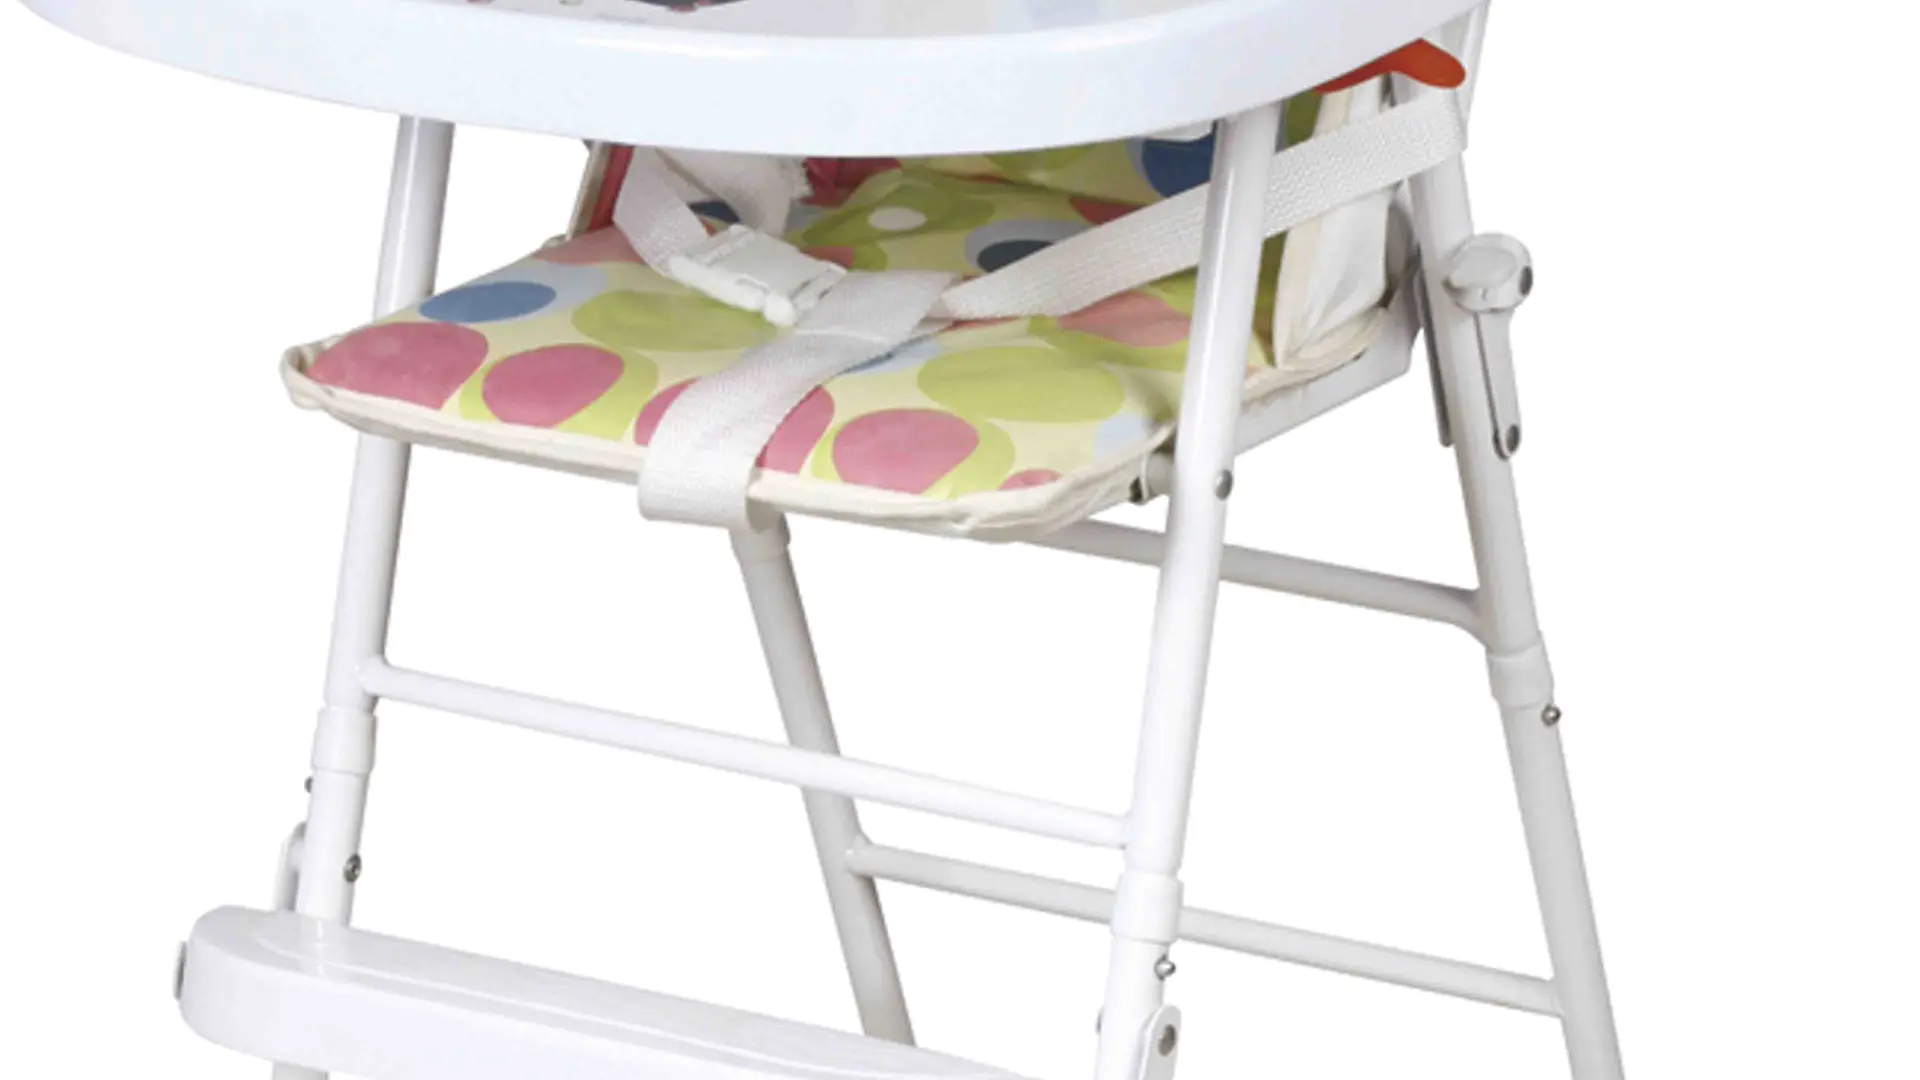 chair high chair for baby price multifunction for infant Aoqi